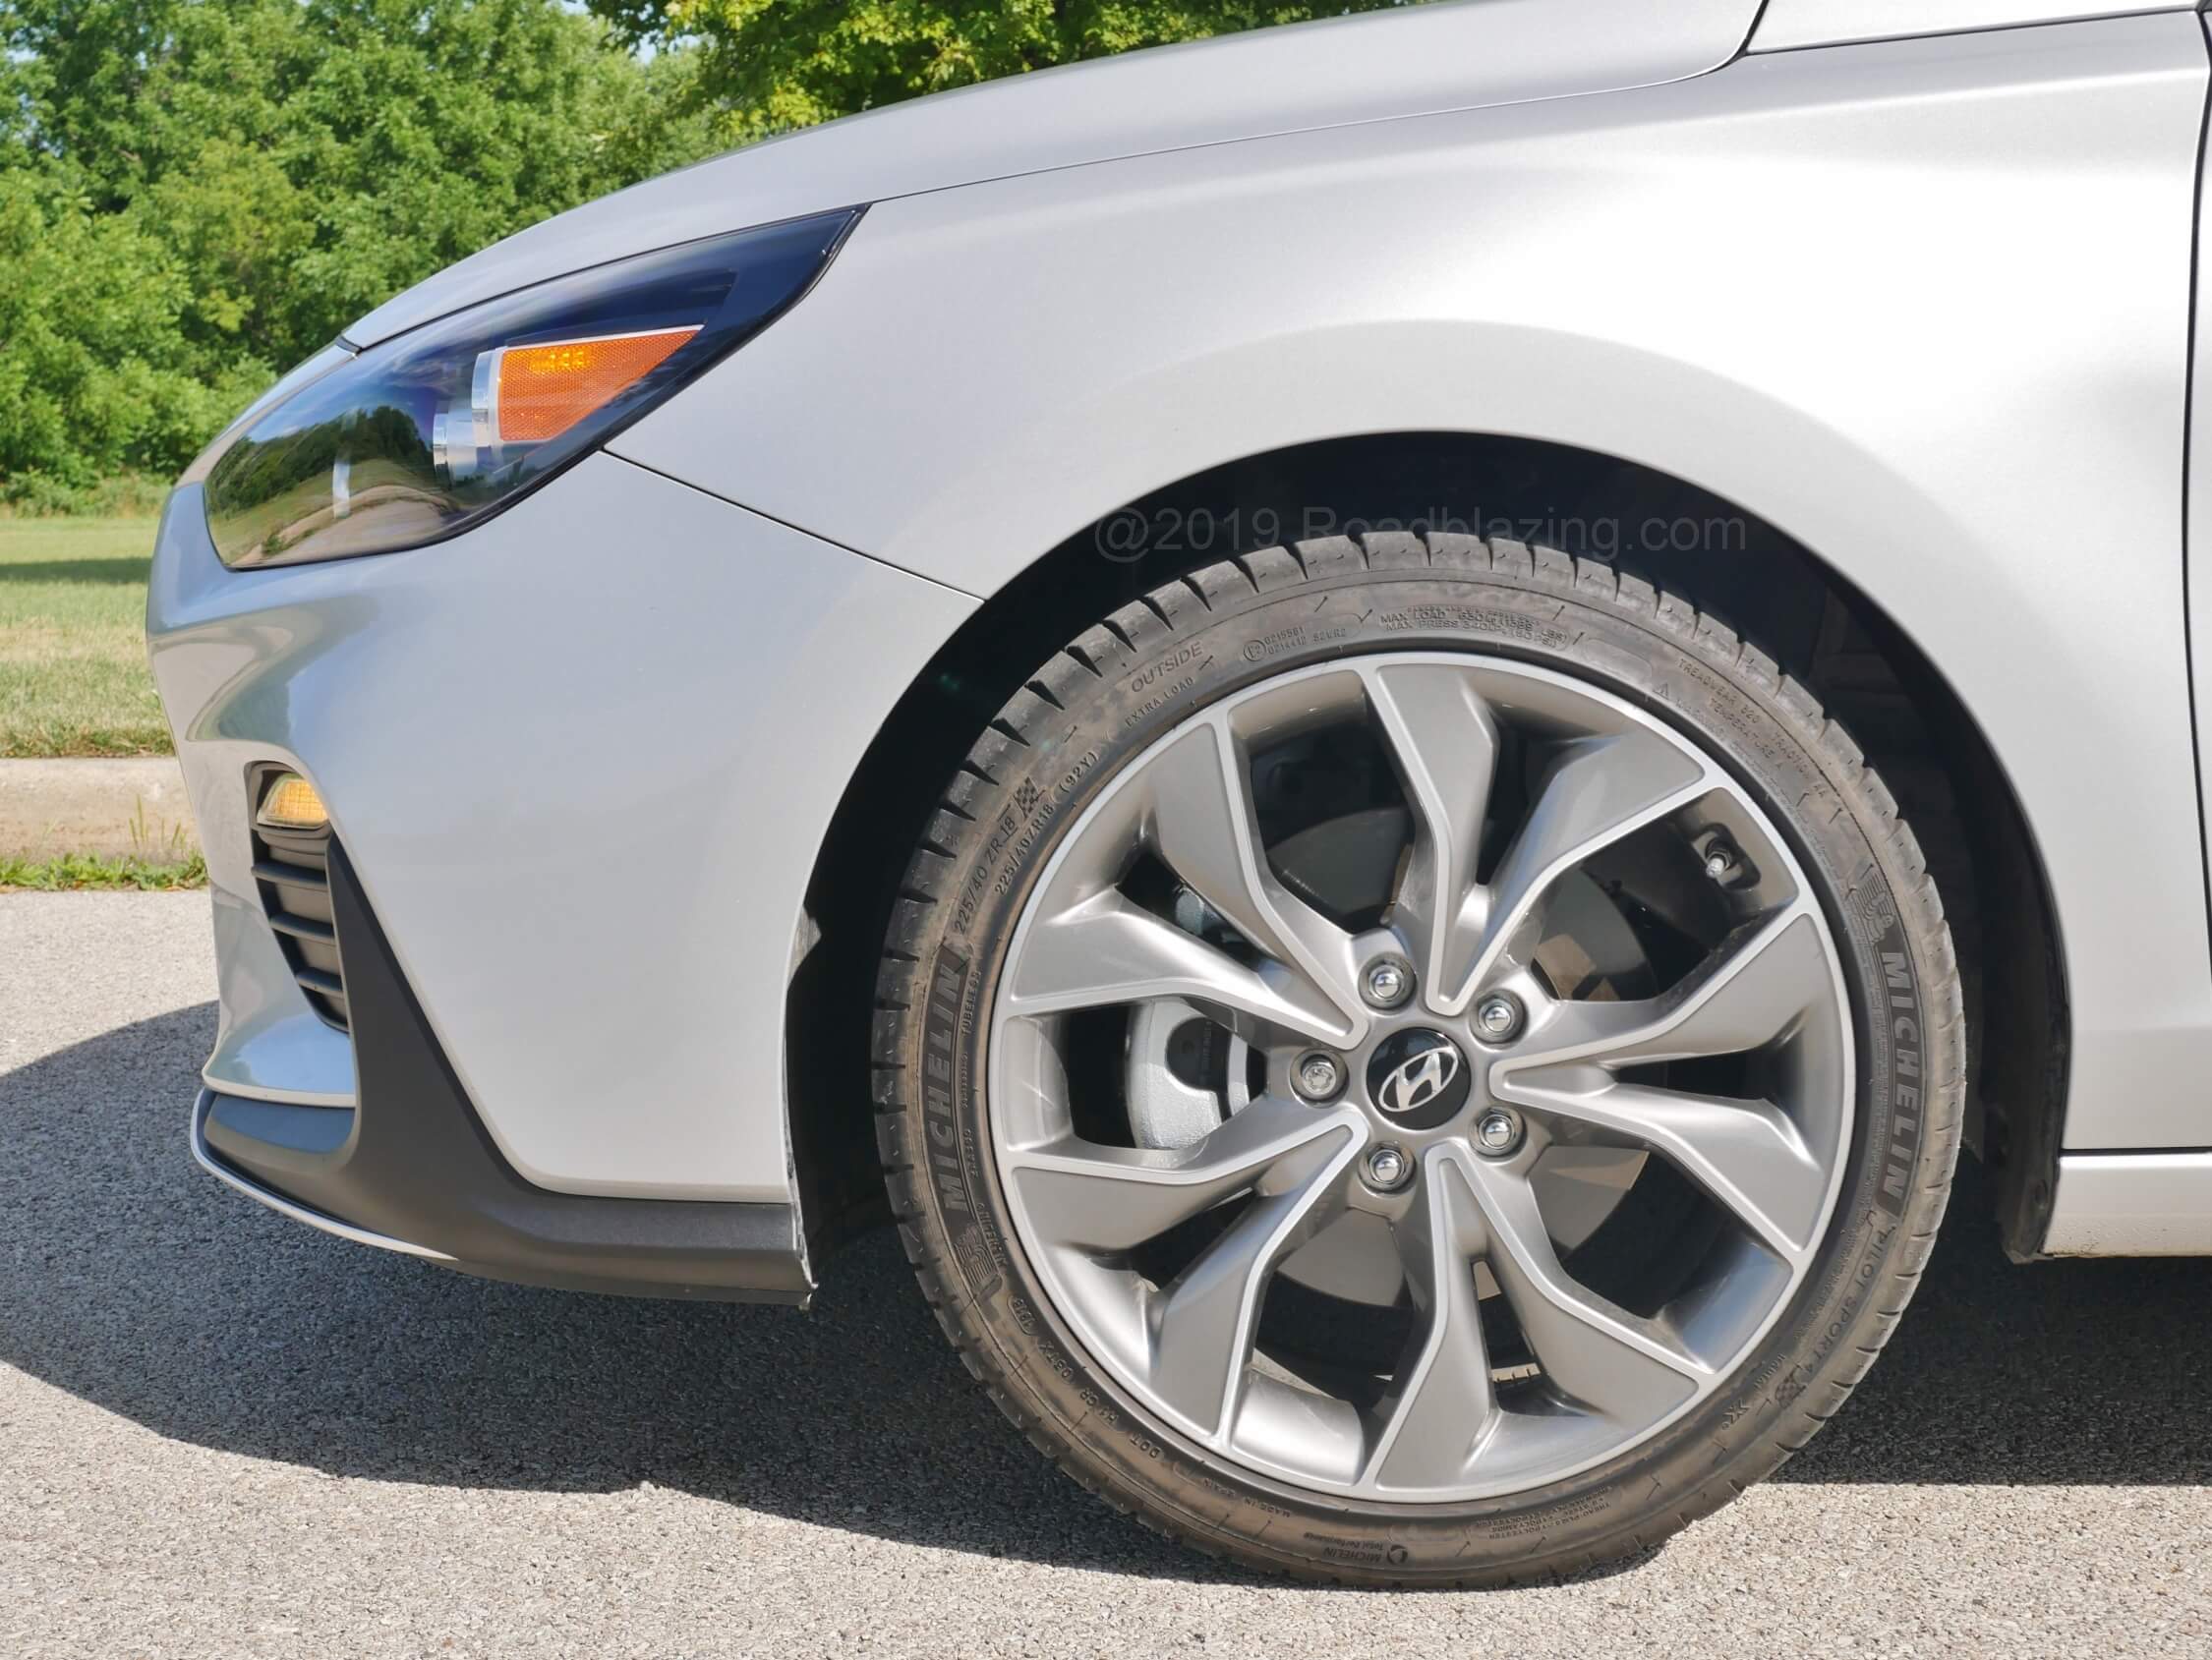 2019 Hyundai Elantra GT N-Line: Boosted spring rates, larger rear sway bar work with the gifted Michelin Pilot Sport 4 summer rubber for truly progressive mostly tug free tenacity, giving up little in daily driving civility. Once speed builds the steering rack winds rapidly and plus sized brake rotors render consistent feeling speed scrub.